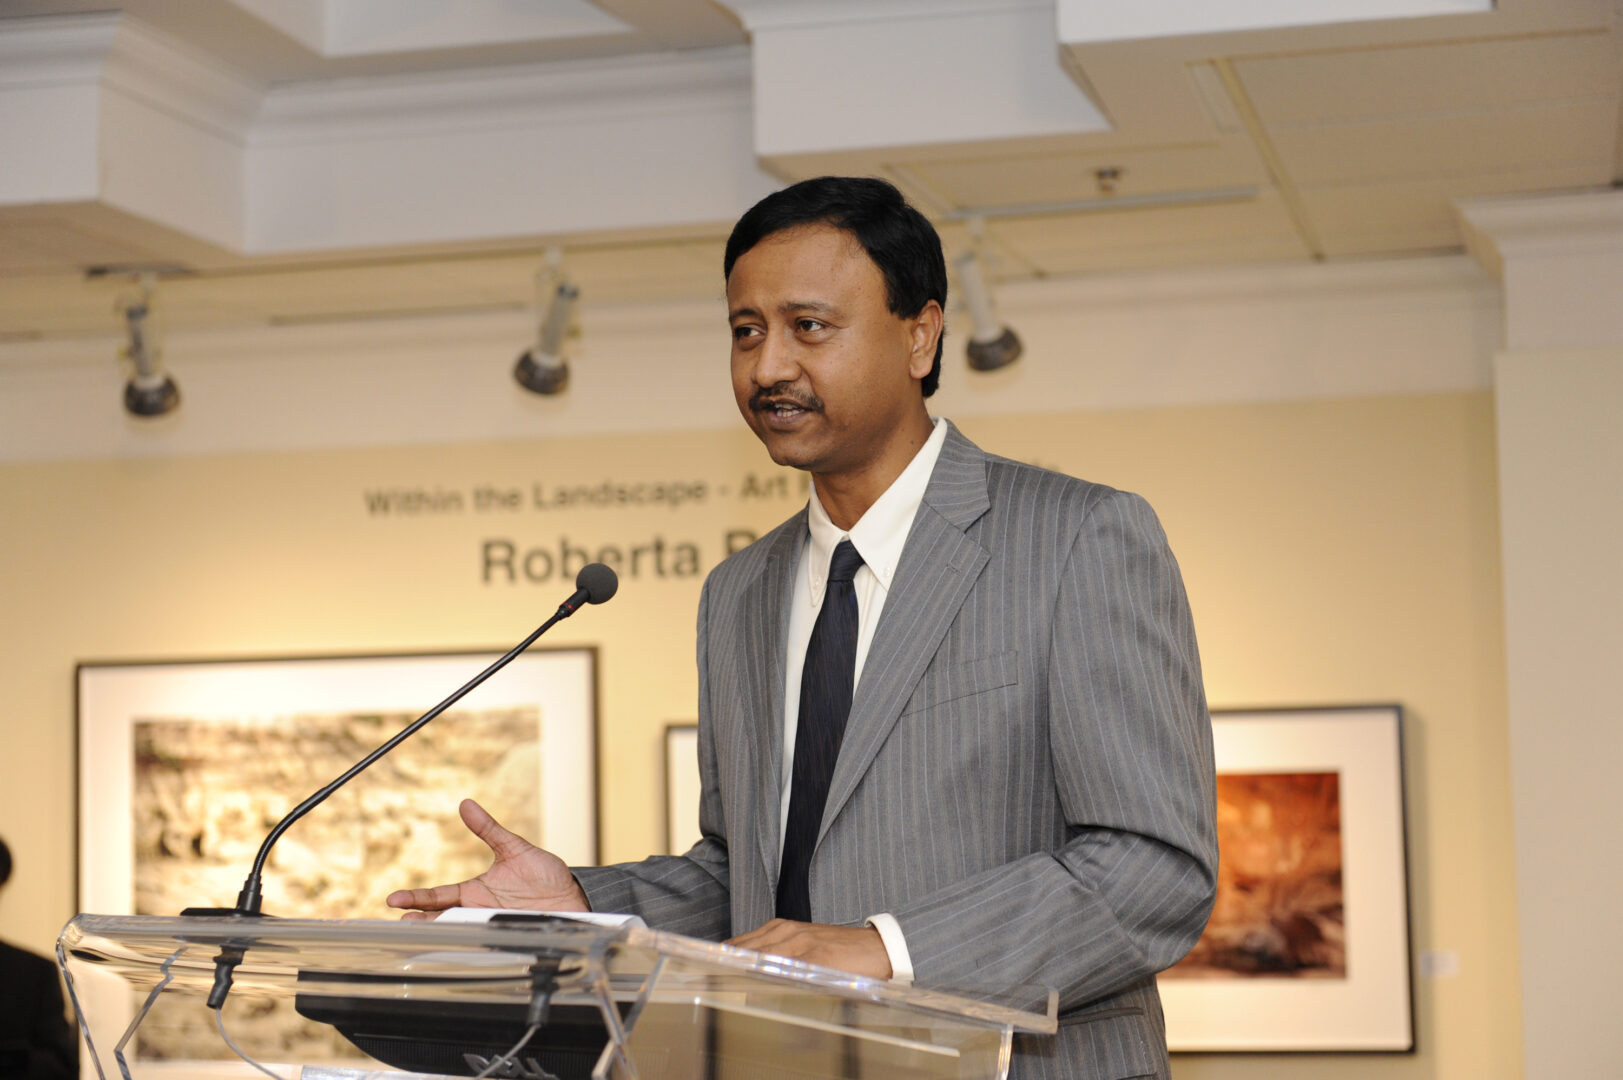 Kalyan Ghosh, Chief Commercial Officer, Essar Steel Algoma Inc. addresses gallery patrons at The Roberta Bondar Foundation's first Traveling Exhibition and Learning Experience